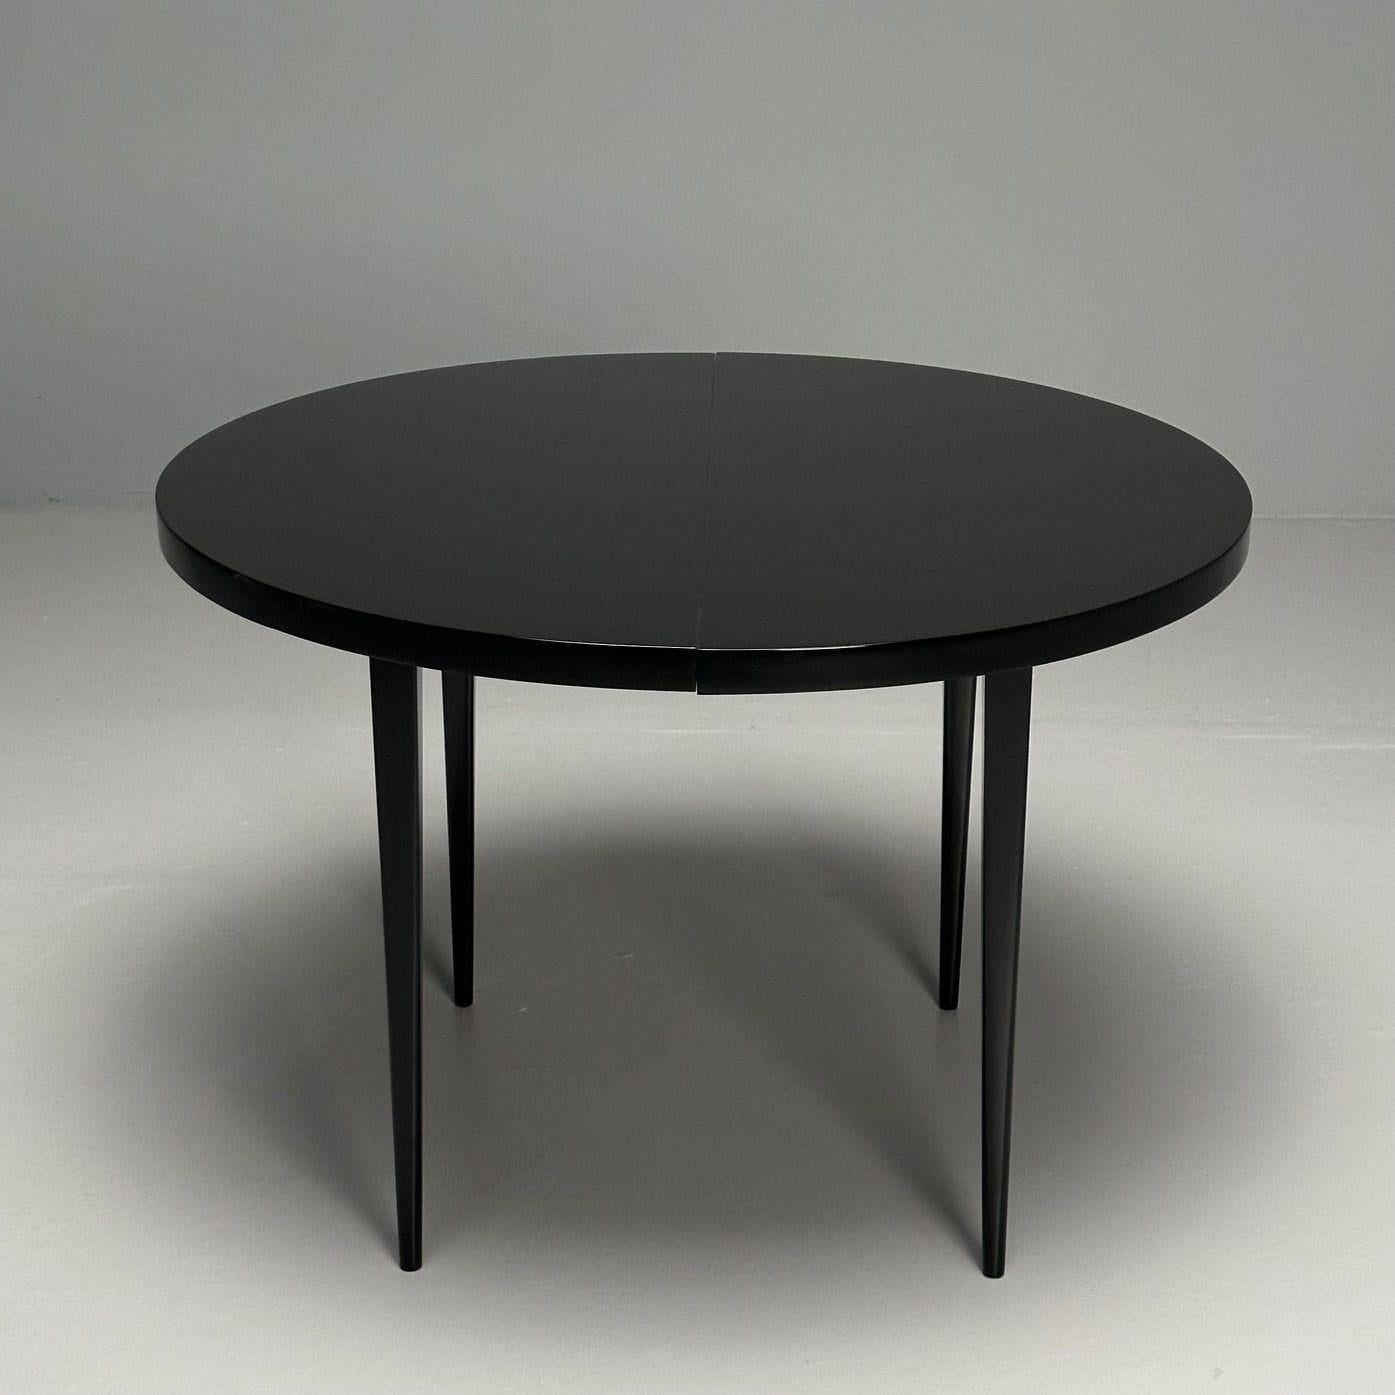 Paul McCobb, Mid-Century Modern Planner Group Dining Table, Black Lacquer, 1950s In Good Condition For Sale In Stamford, CT